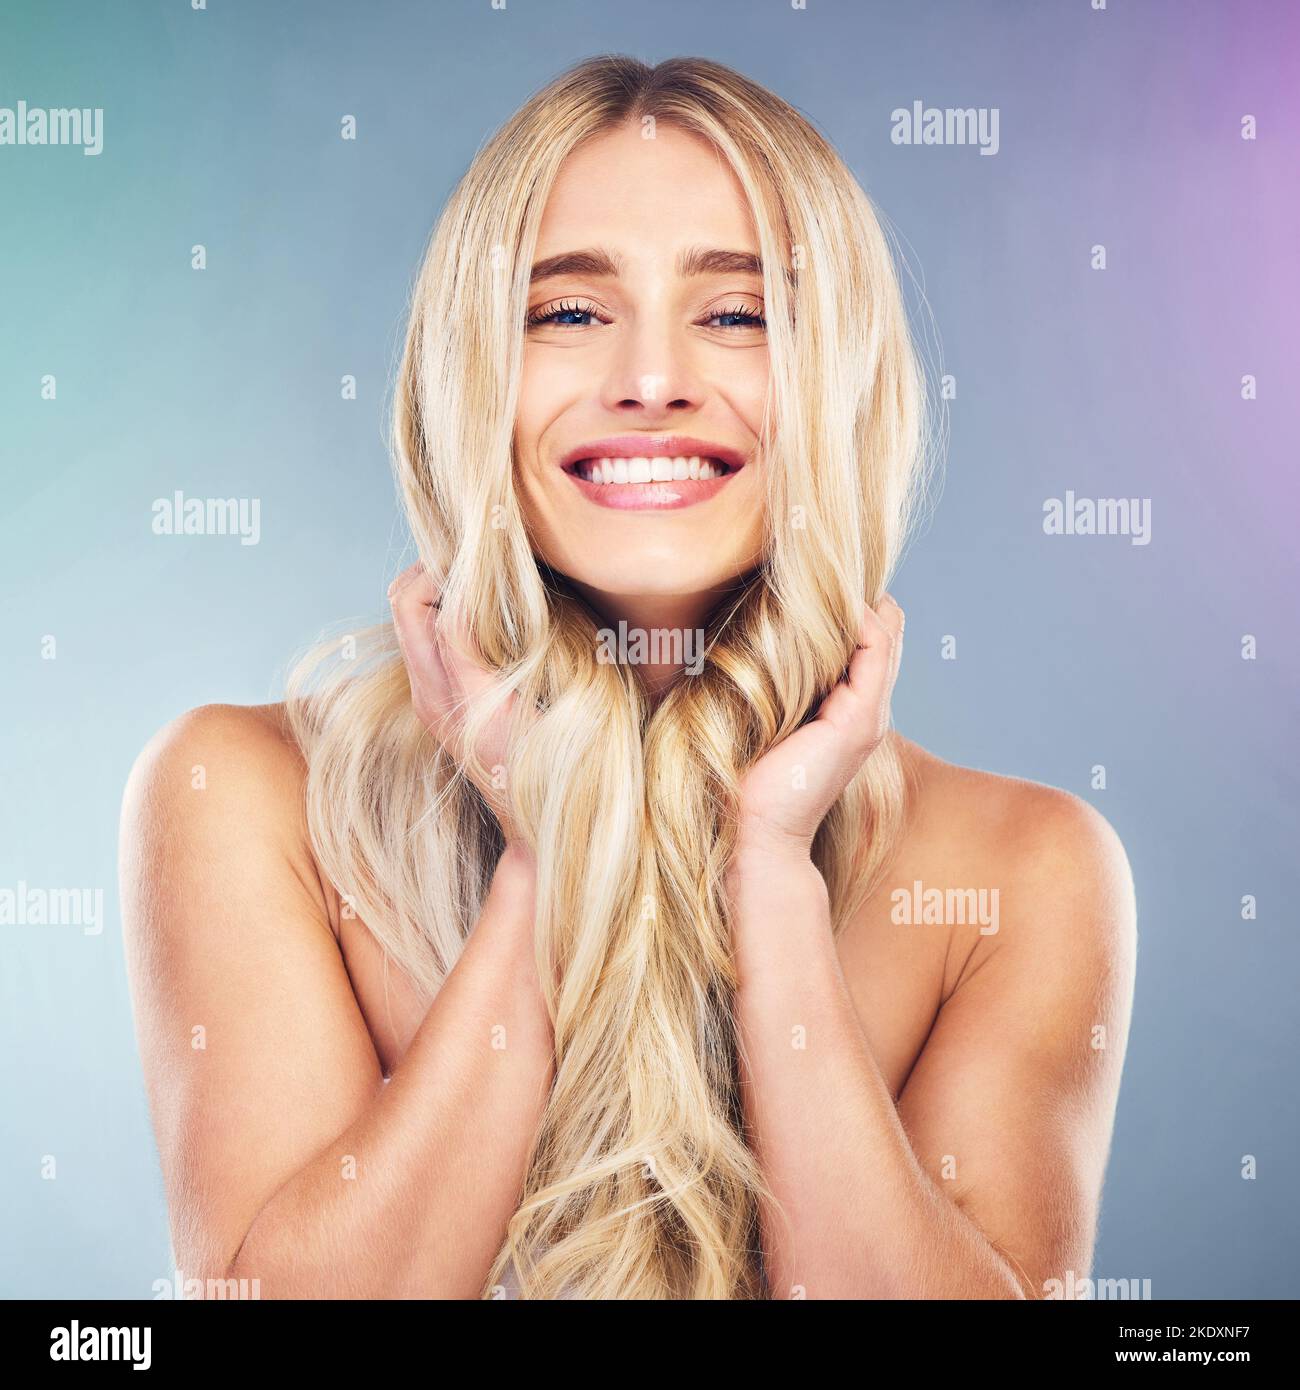 Hair care, beauty and wellness of woman with cosmetics, makeup and shampoo for hair growth, shine and health. Portrait, face and smile of model Stock Photo